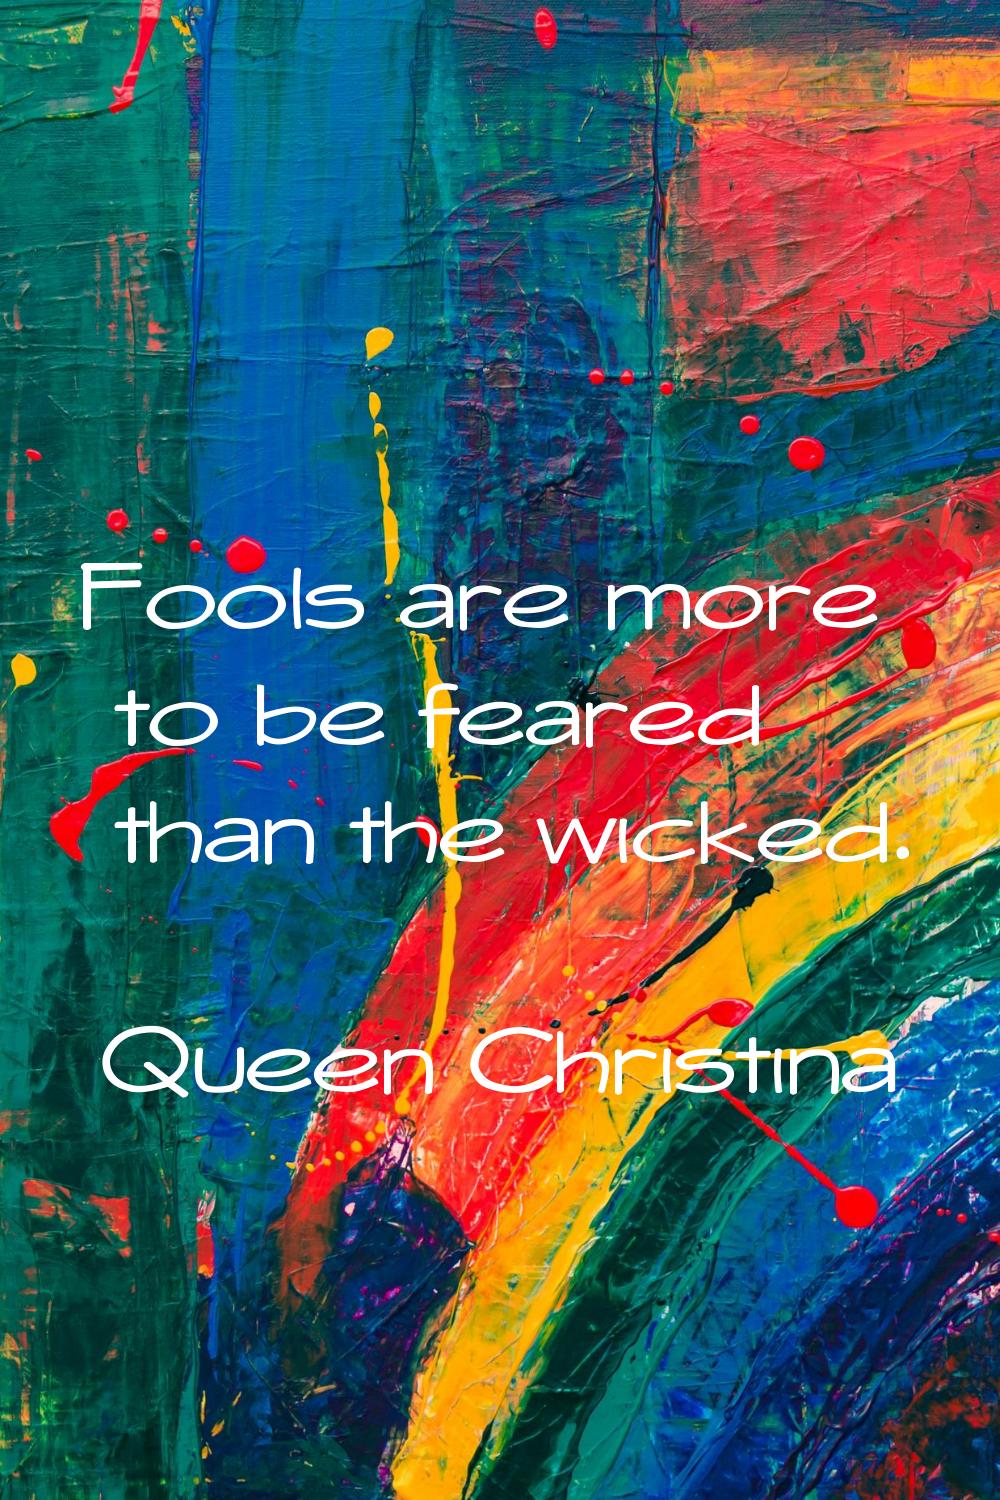 Fools are more to be feared than the wicked.